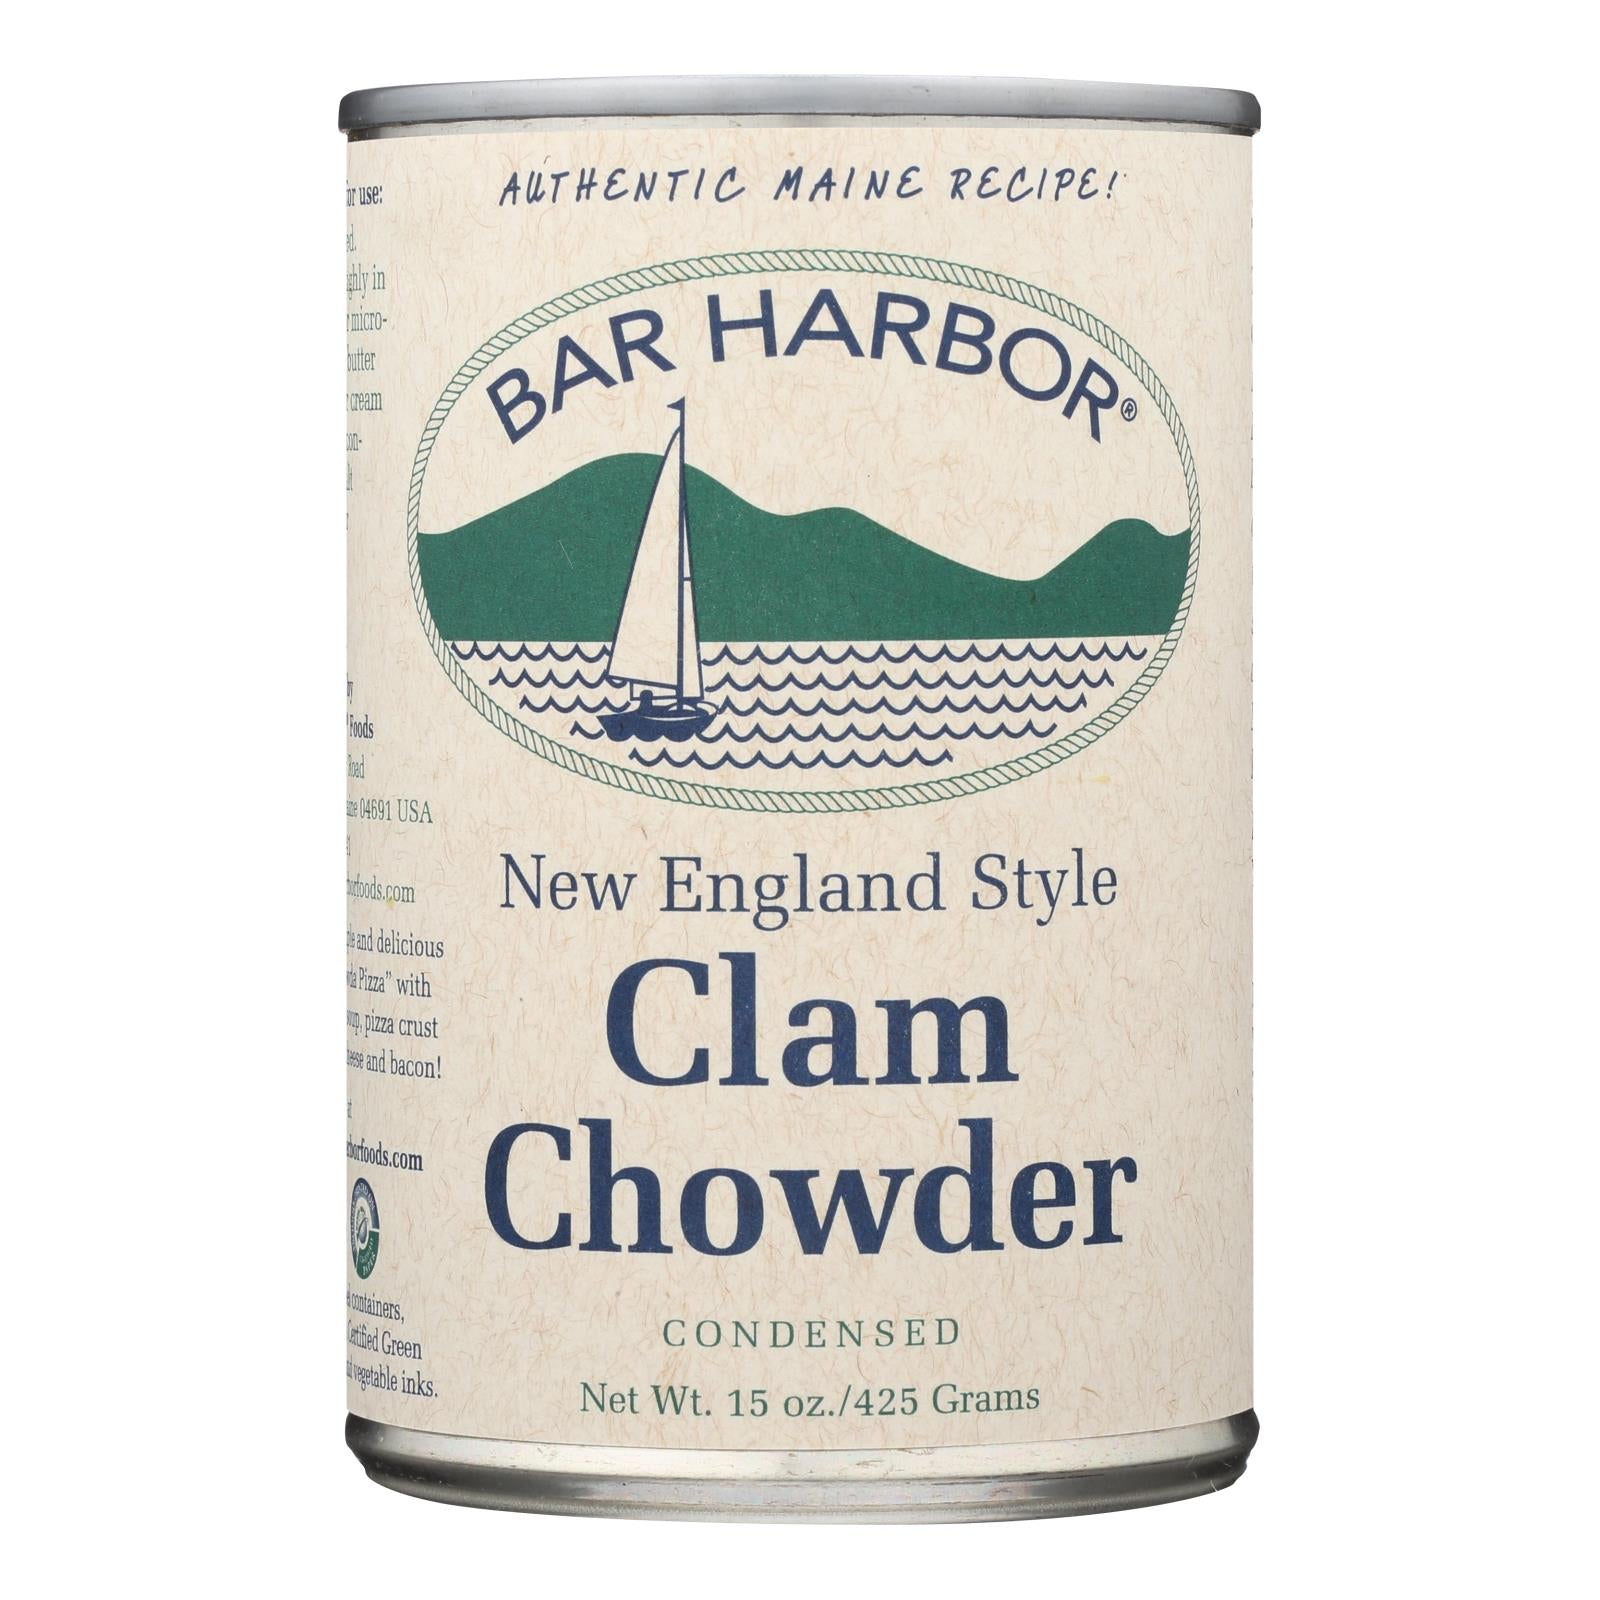 Bar Harbor, Bar Harbor - All Natural New England Clam Chowder - Case of 6 - 15 oz. (Pack of 6)